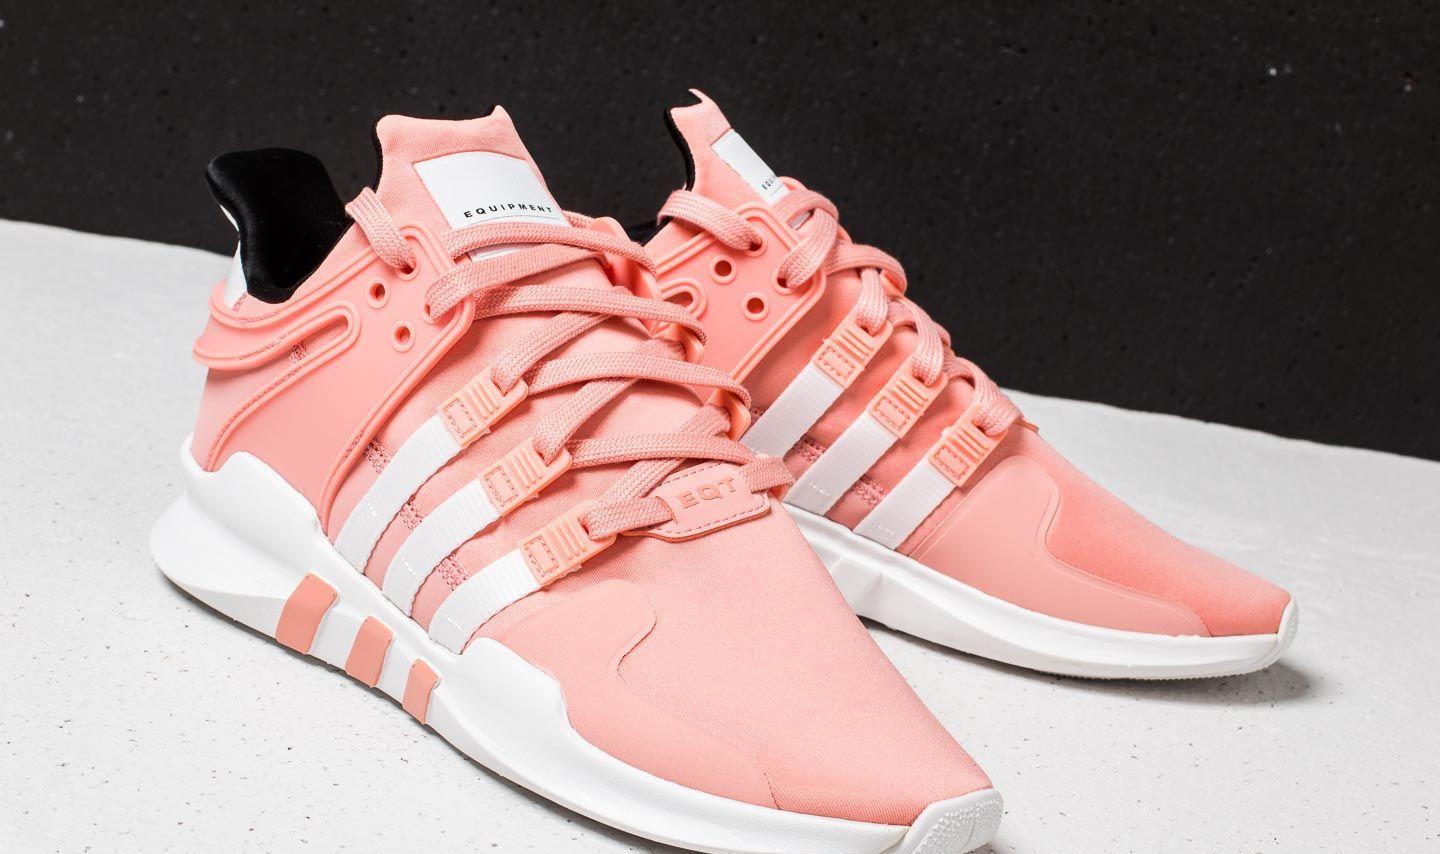 Adidas Adidas Eqt Support Adv Trace Pink Ftw White Core Black For Men Lyst - adidas tracksuit pants roblox adidas equipment support adv